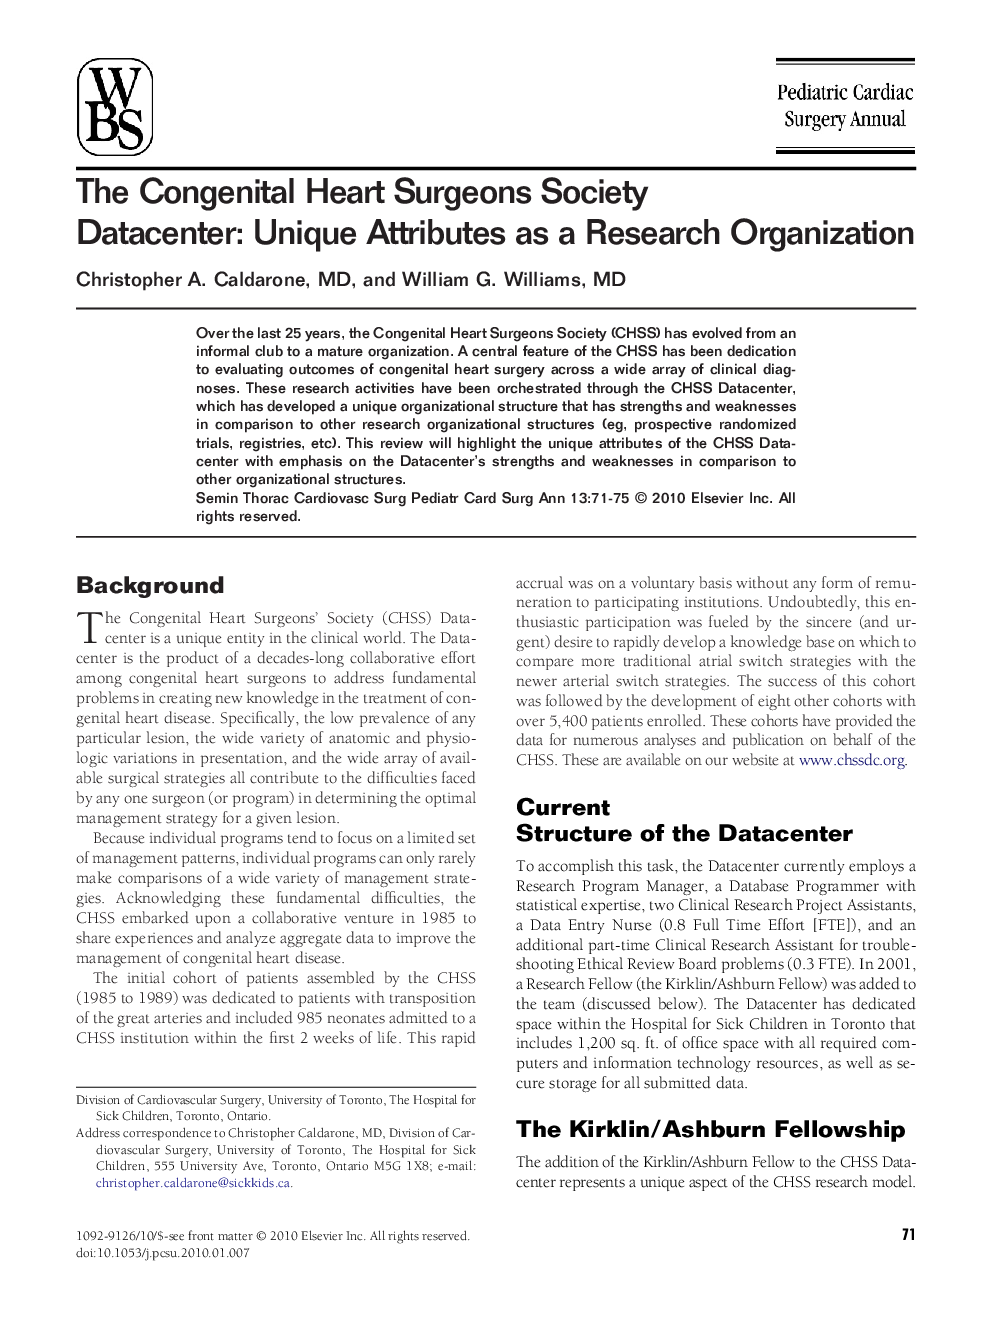 The Congenital Heart Surgeons Society Datacenter: Unique Attributes as a Research Organization